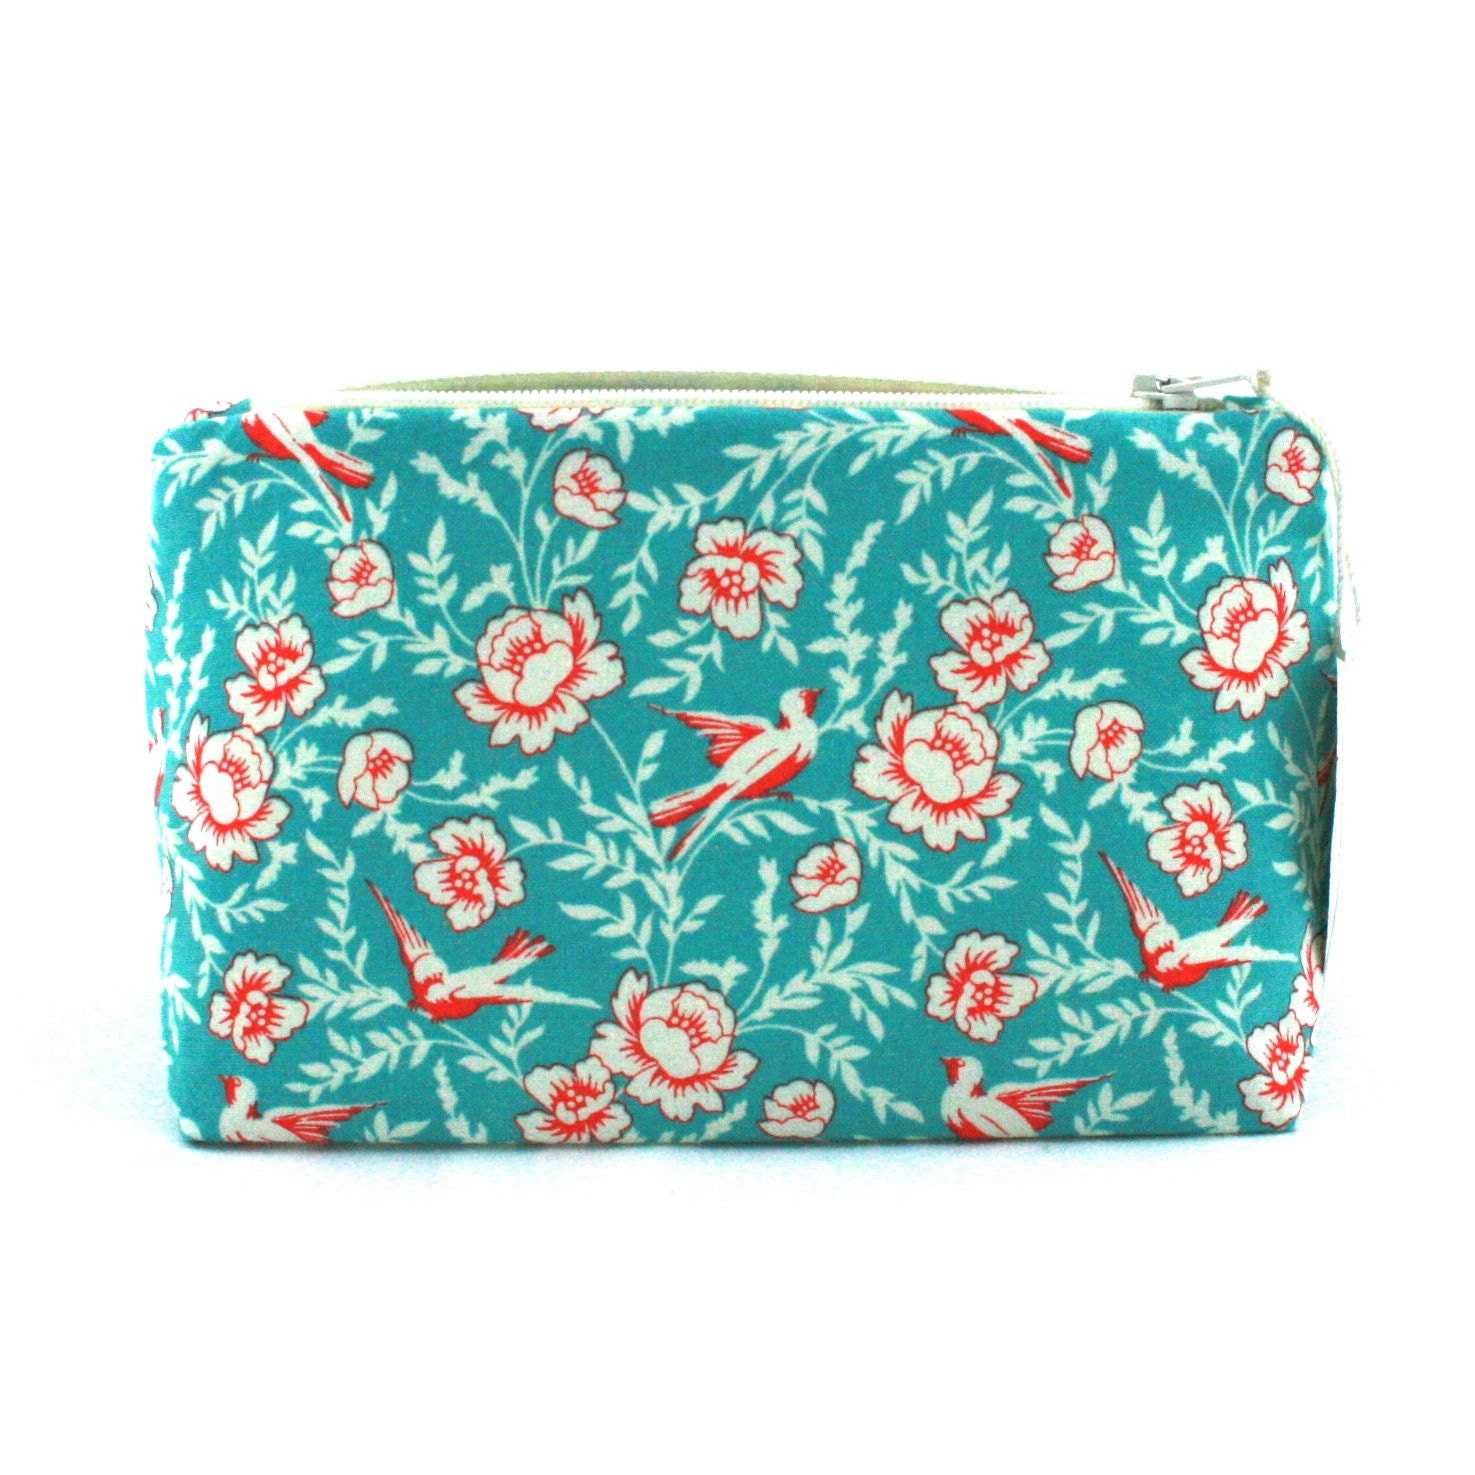 Aqua & Red Bird Makeup Bag / Cosmetic Bag in Retro Swallow Print - Gift for Her , Vintage Bridesmaid Gift, Birthday Gift, Mother's Day - JordaniSarreal